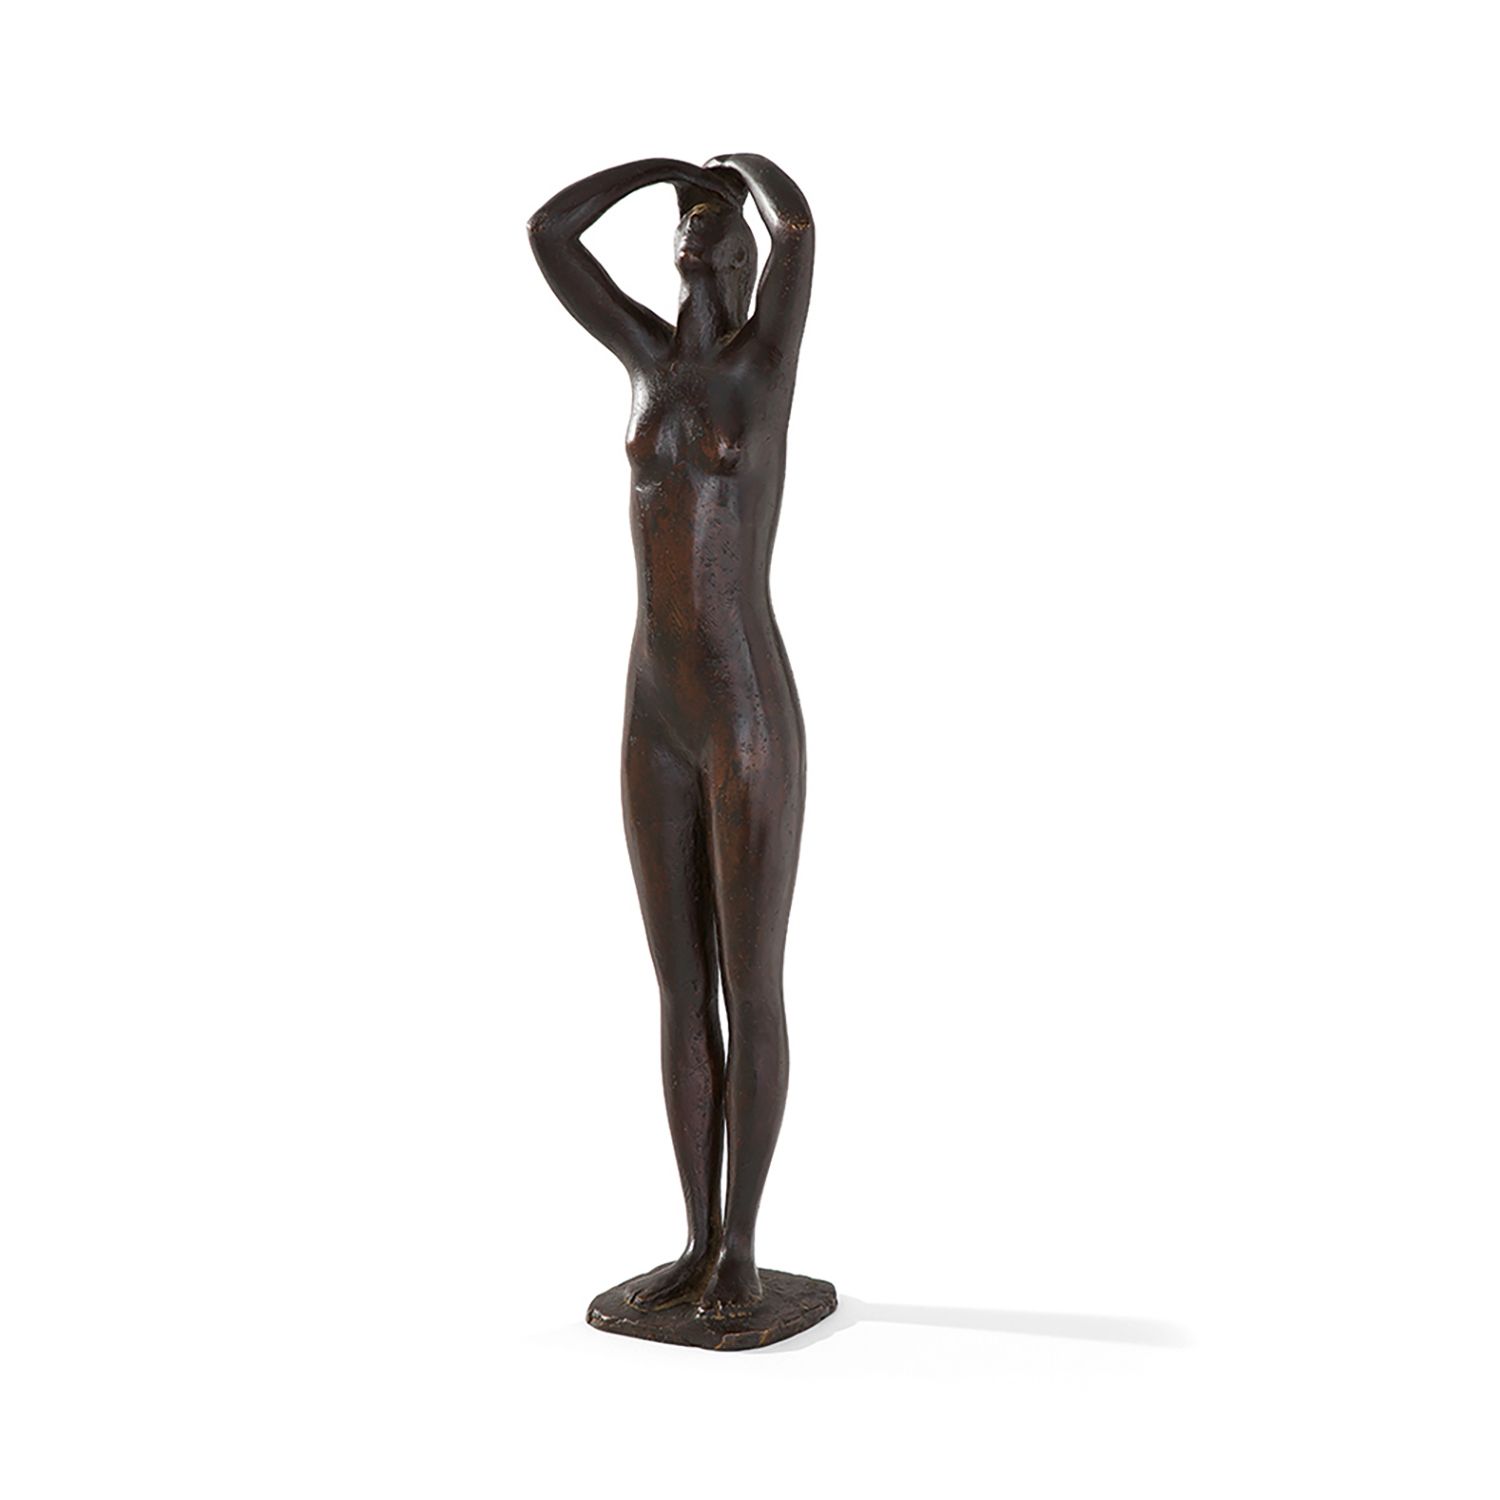 Null PIERRE LAGÉNIE (1938-2020)
Bather
Bronze with brown patina 
Signed and numb&hellip;